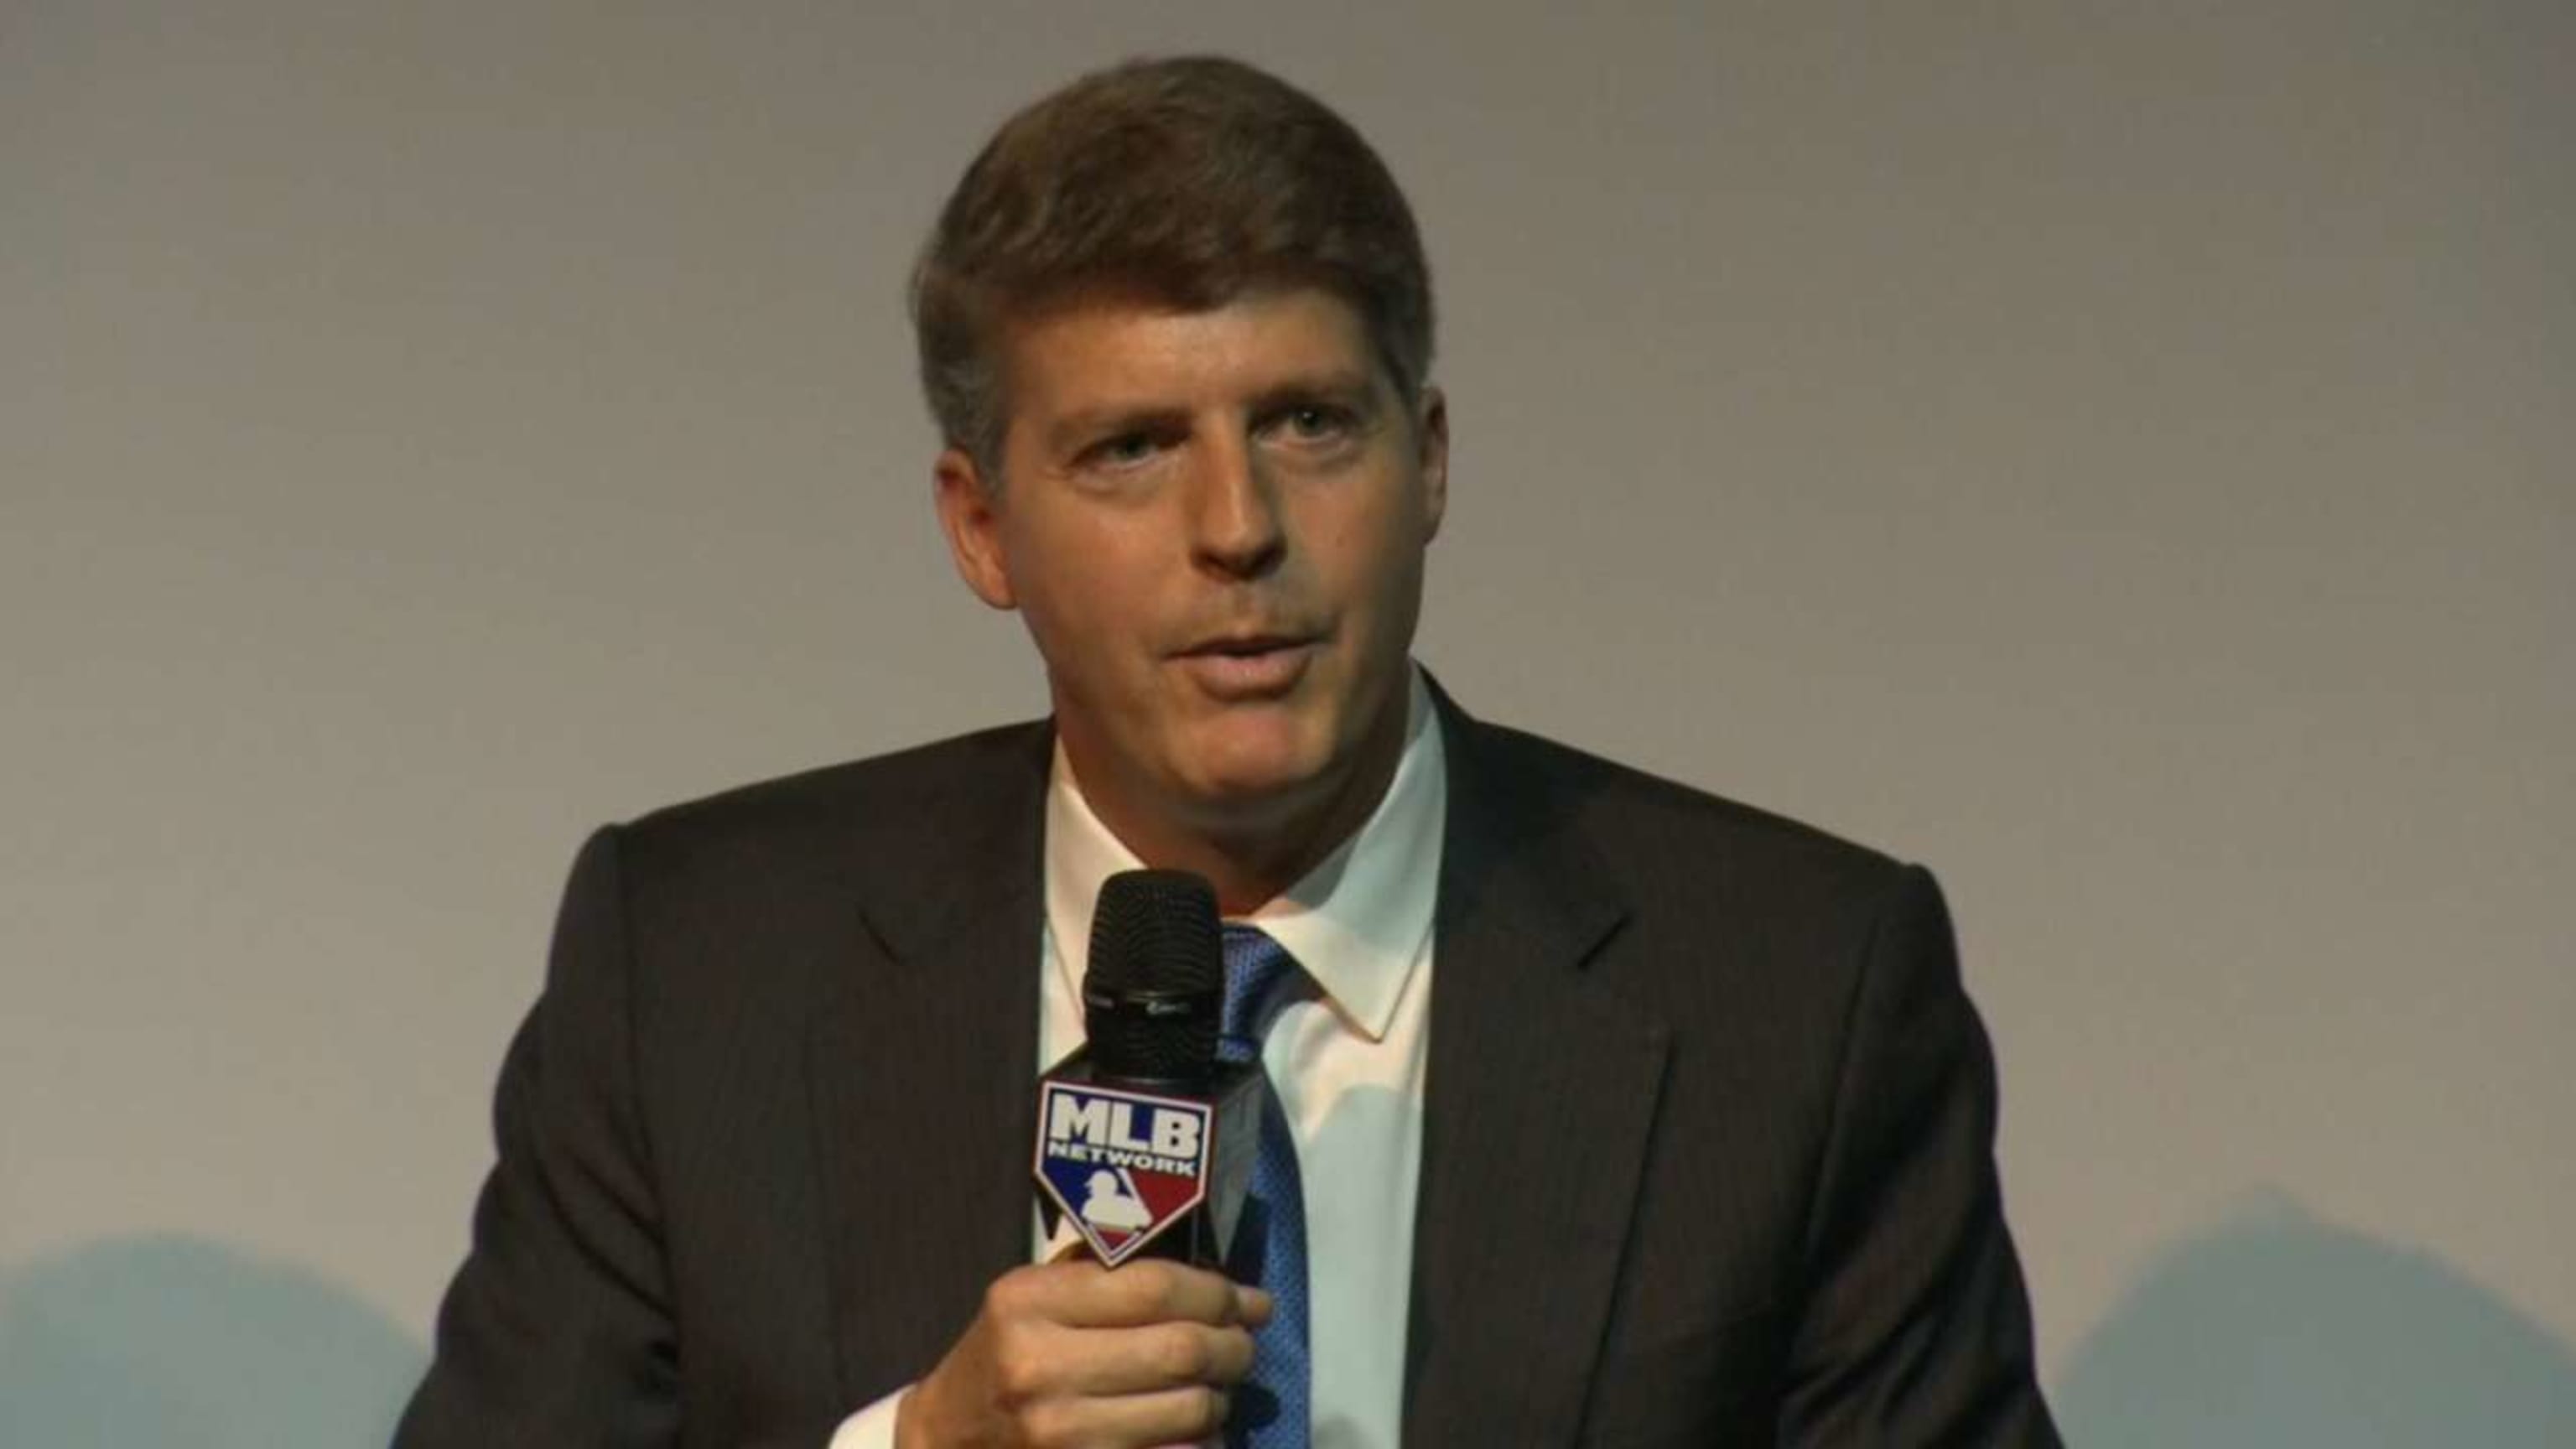 Hal Steinbrenner throws cold water on Yankees' City Connect jersey chances